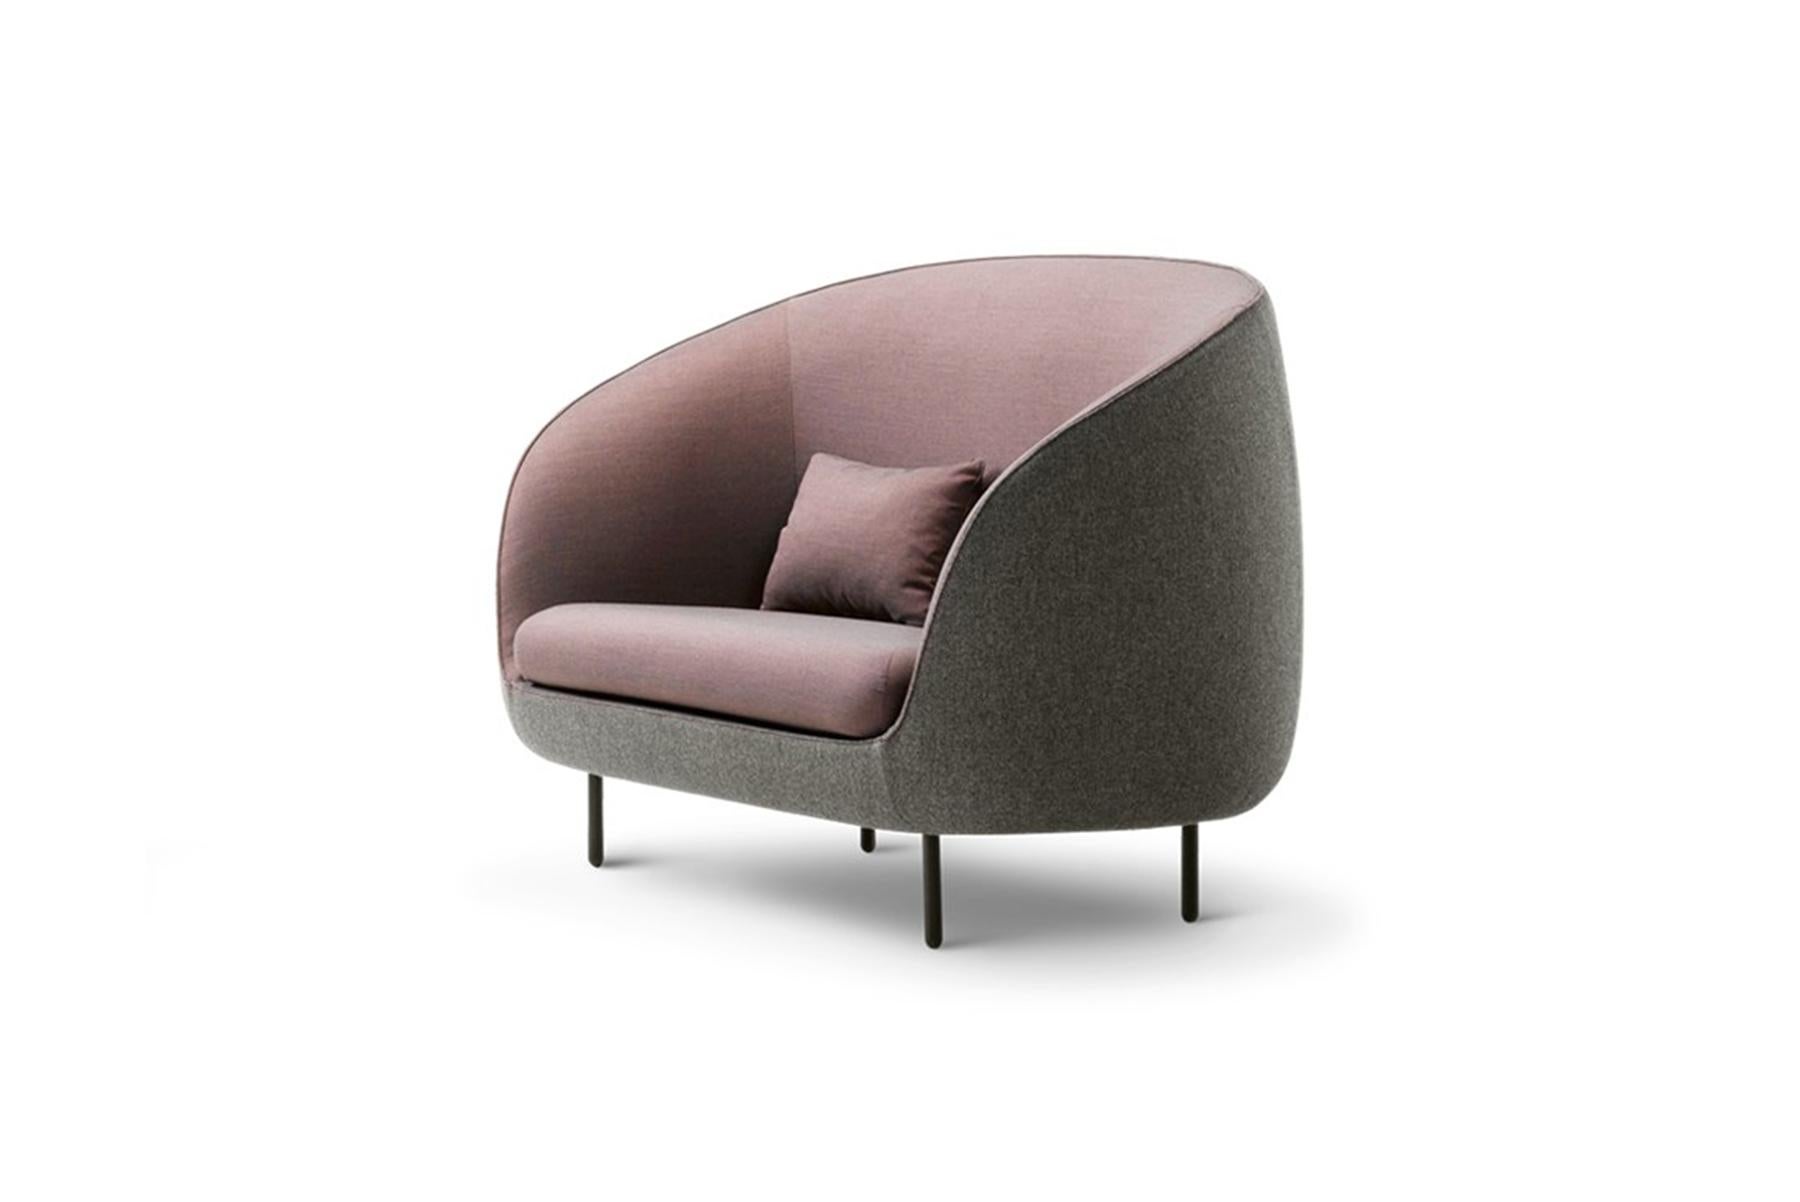 The Gamfratesi Haiku – 2-seater offers both a protective shell and cosy inner setting. Perfectly suited for larger spaces where the setting calls for more intimate privacy seating.